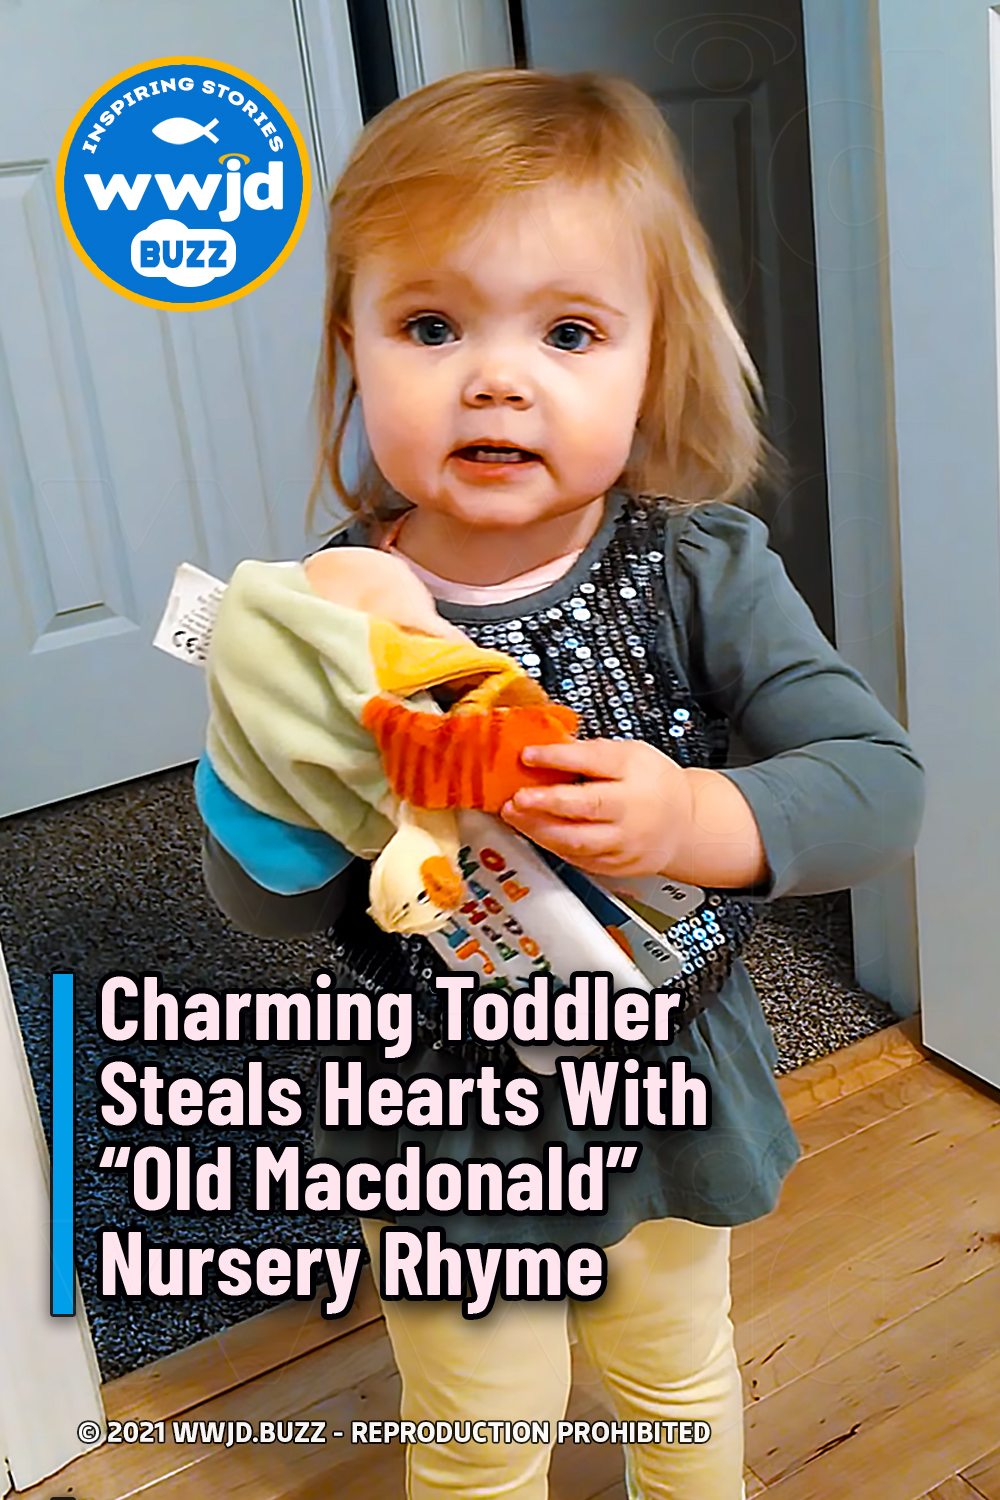 Charming Toddler Steals Hearts With “Old Macdonald” Nursery Rhyme